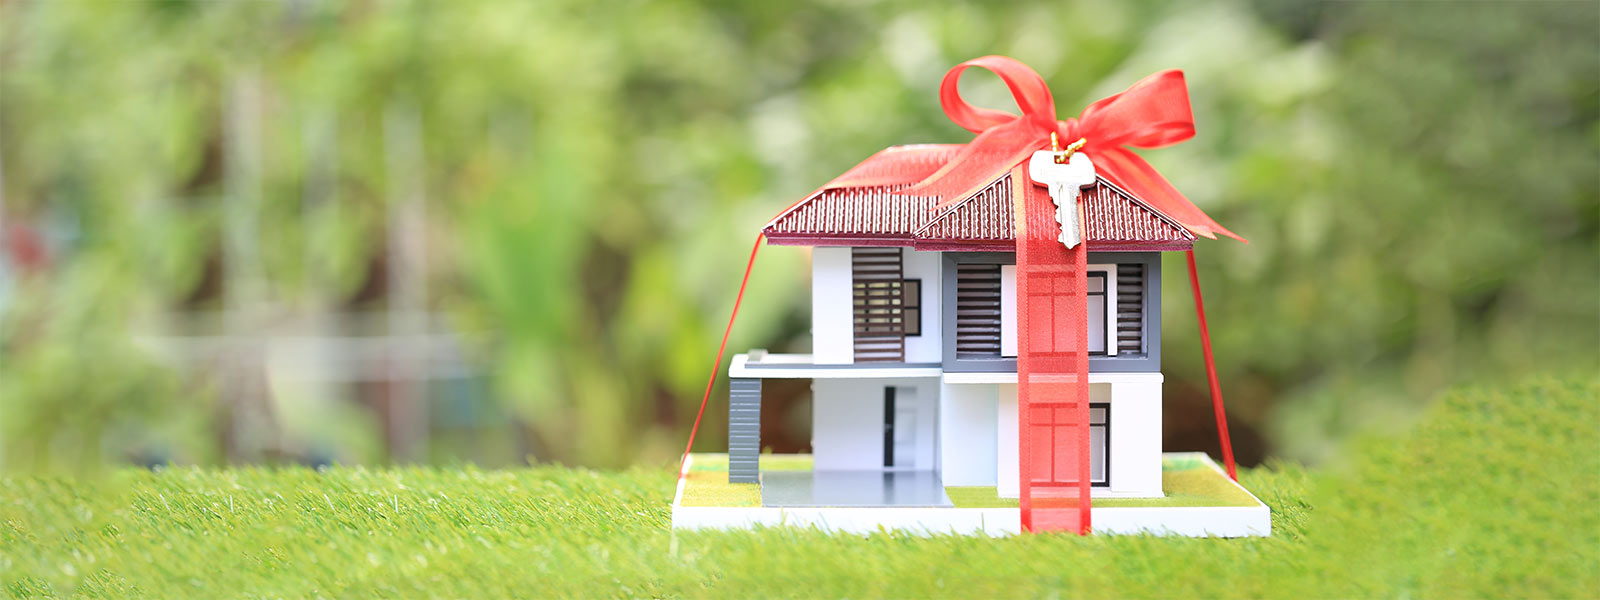 how to gift real estate to family in massachusetts and rhode island